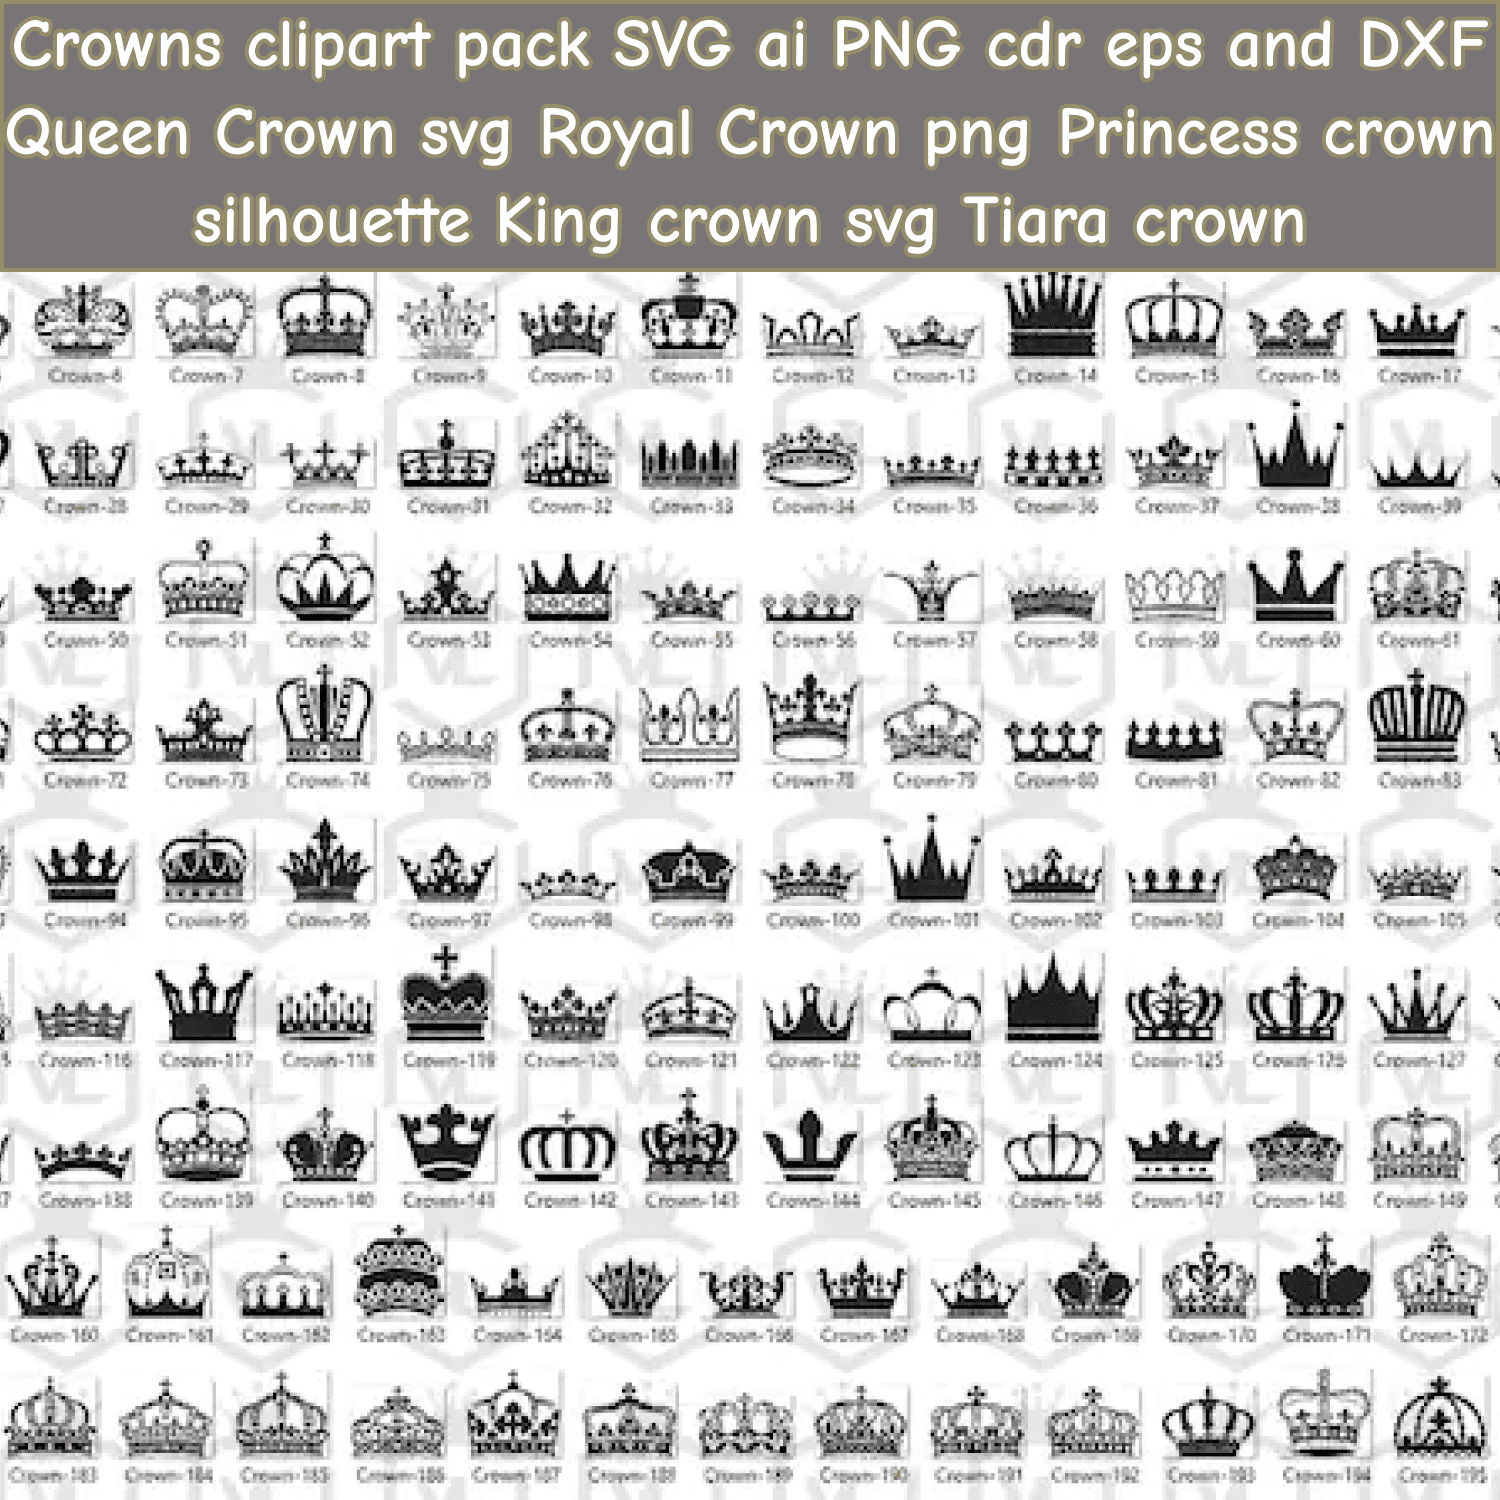 Crowns clipart pack SVG image.